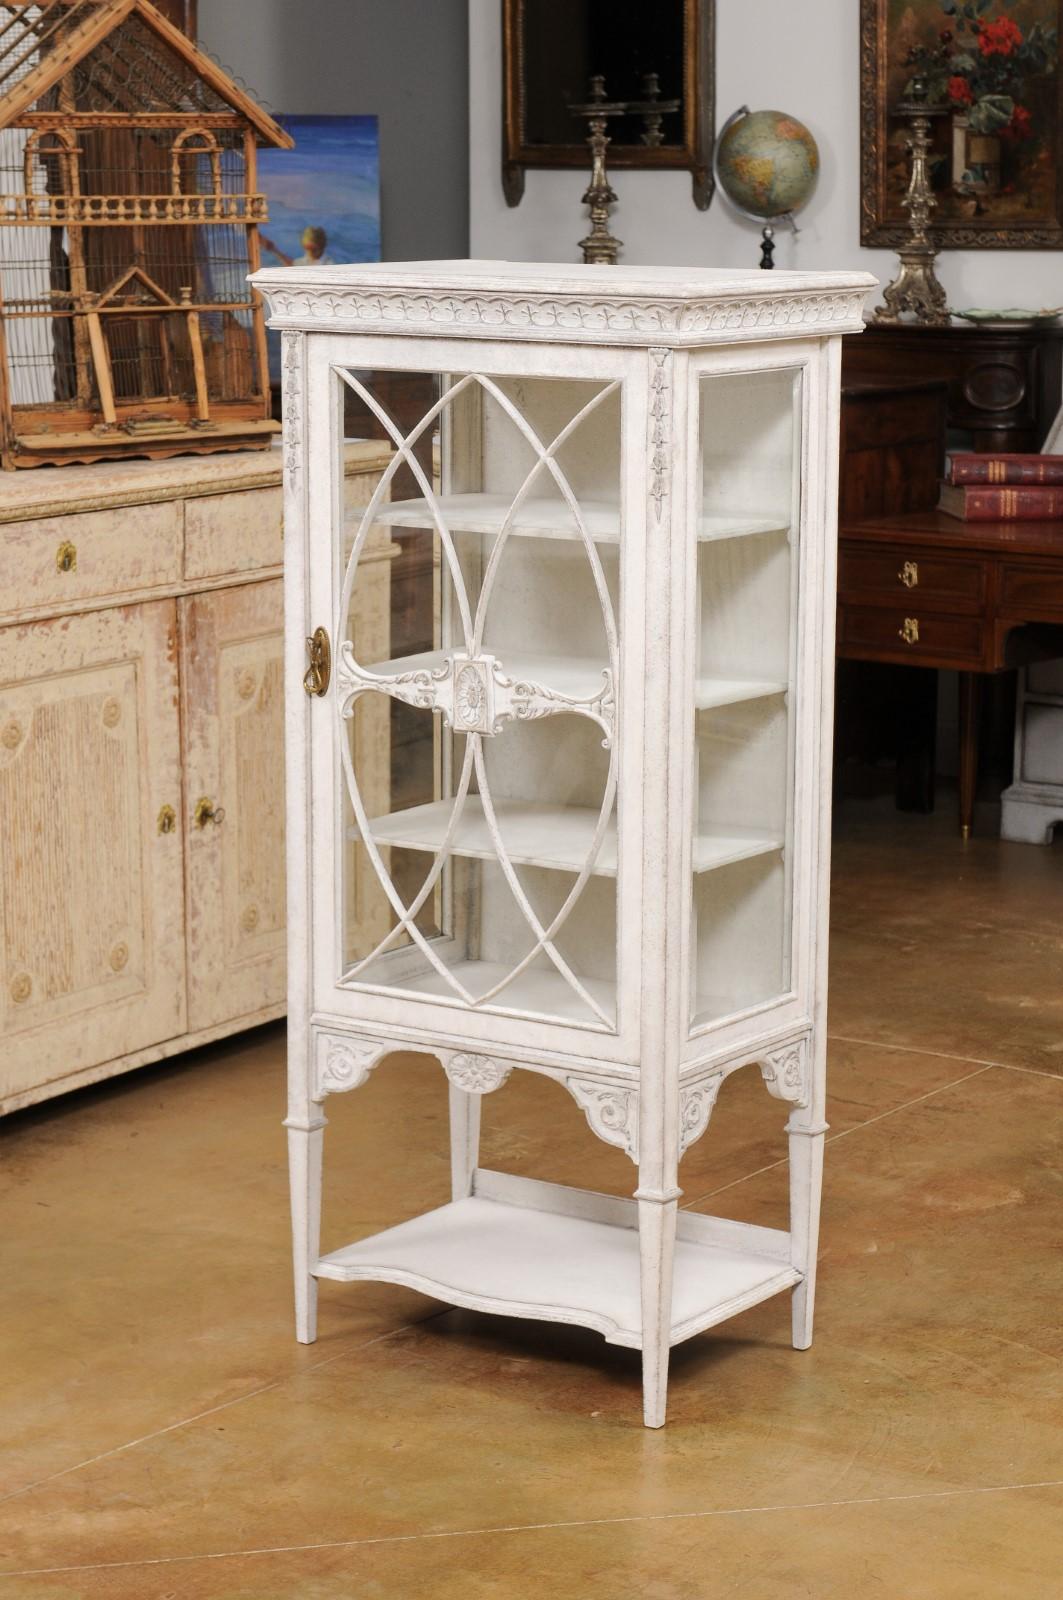 European 1890s Painted Vitrine Cabinet with Glass Door and Richly Carved Décor For Sale 9